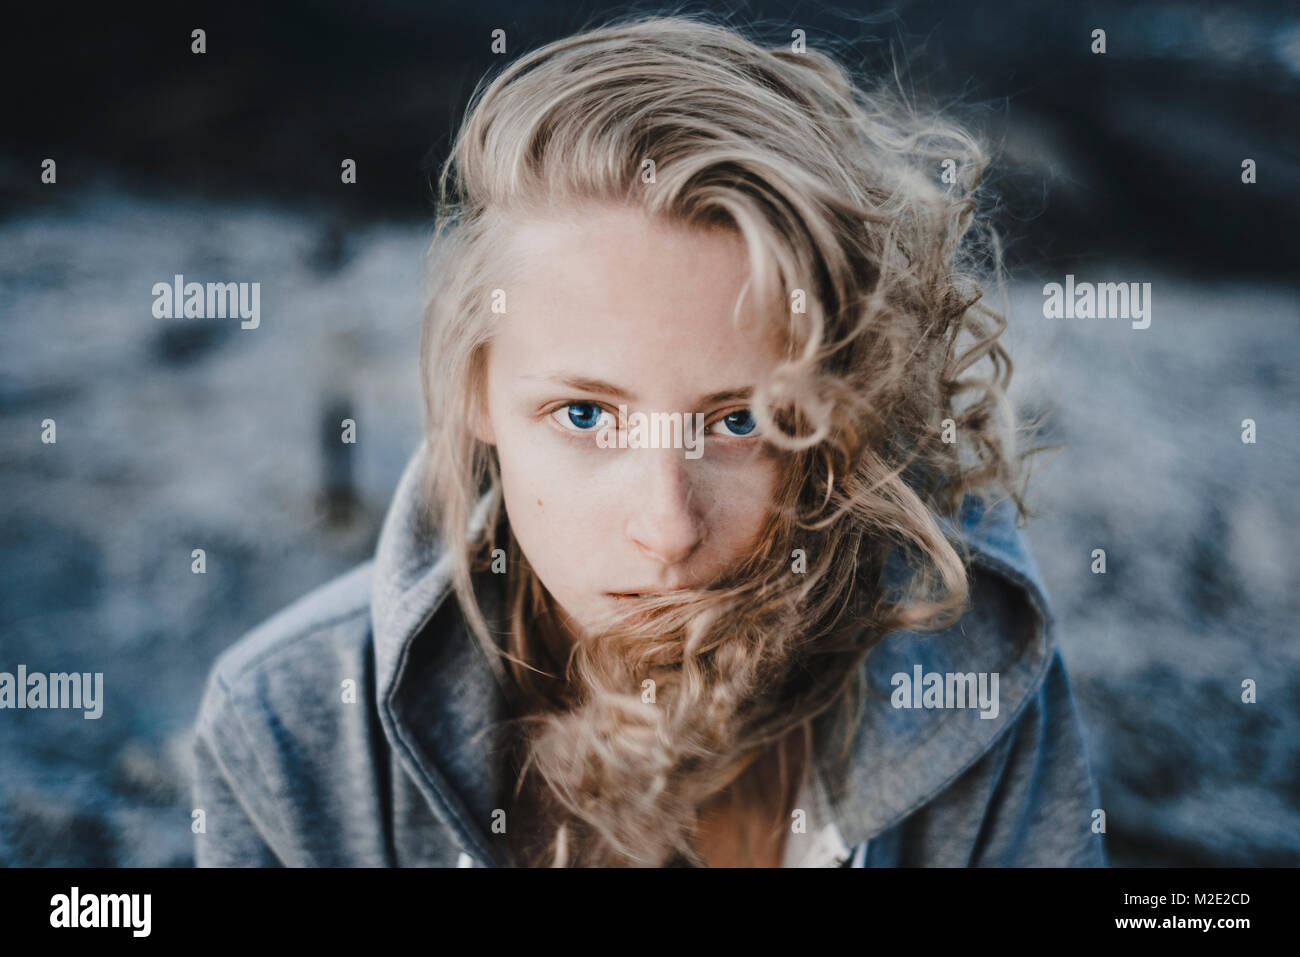 Close up of wind blowing hair of Caucasian woman Stock Photo